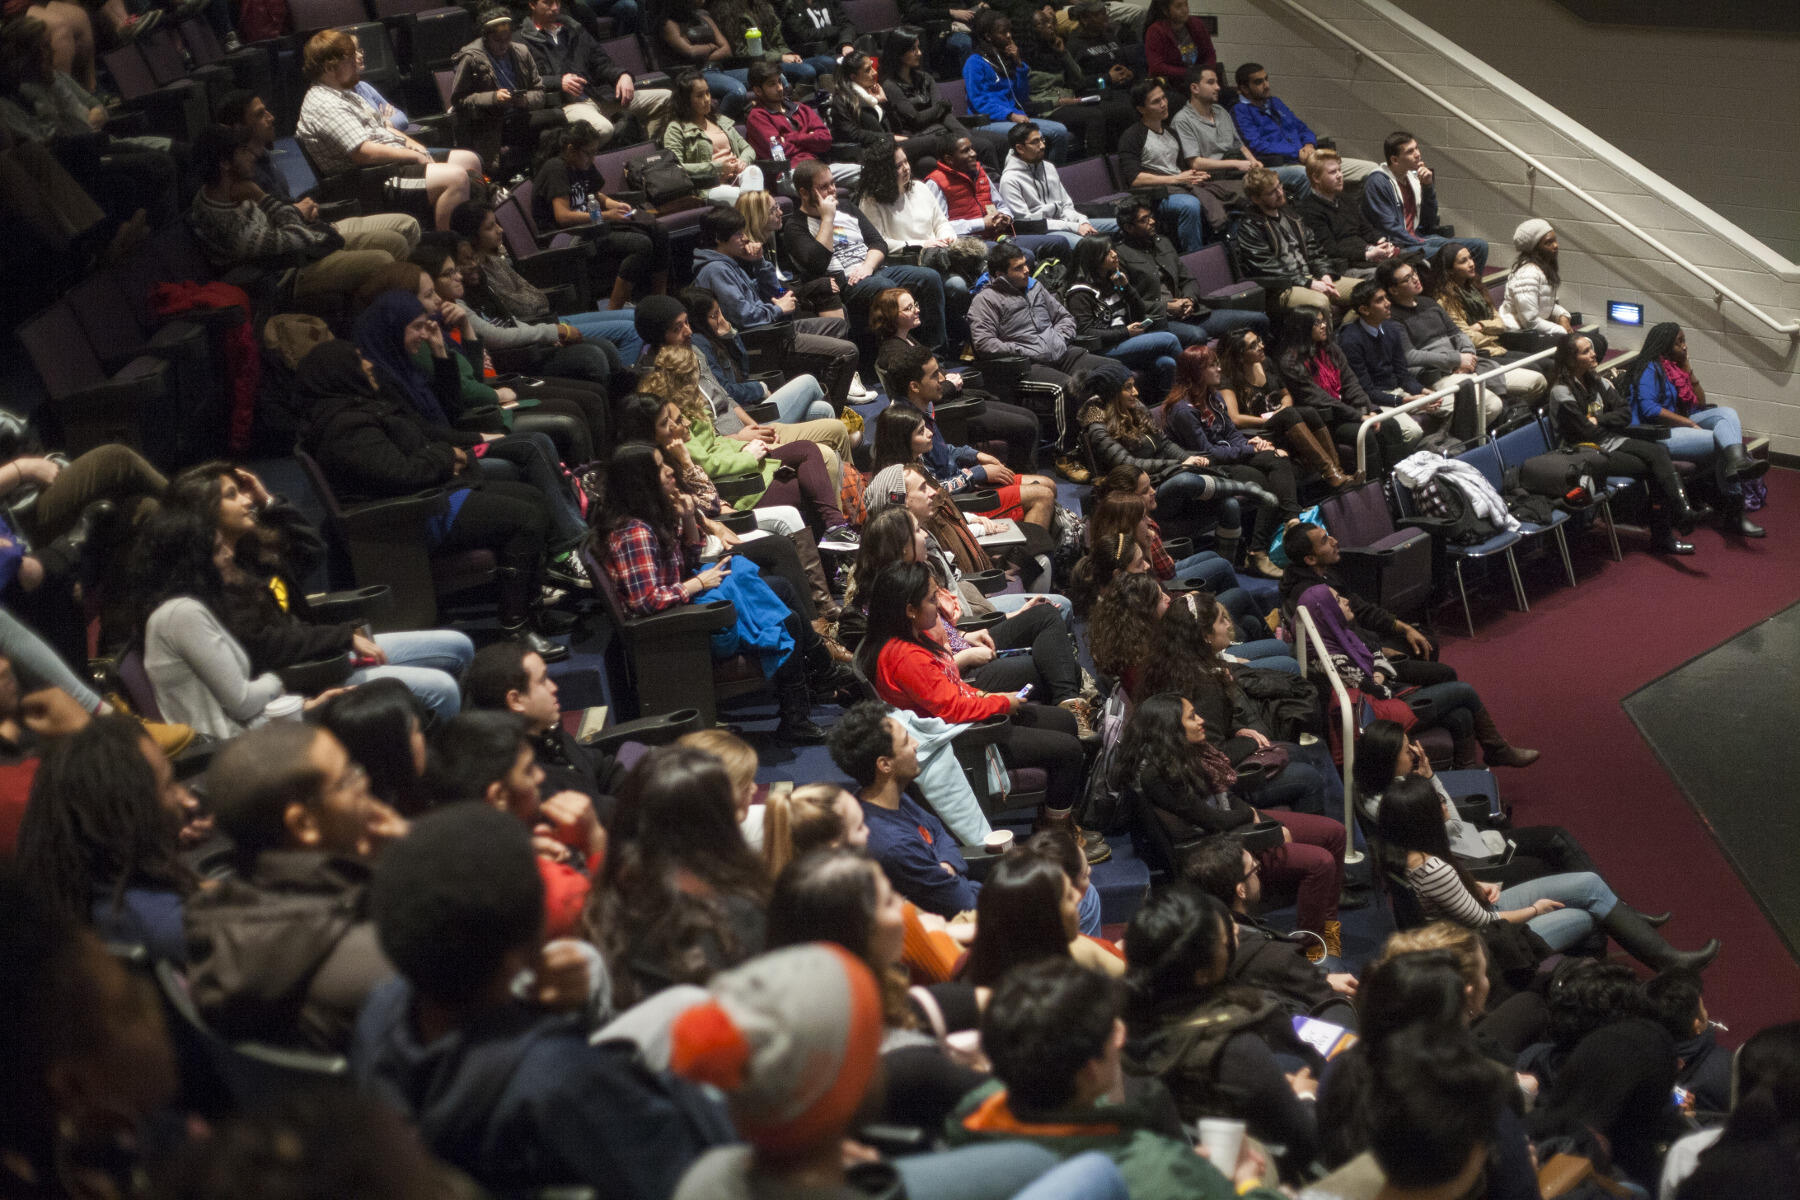 At a recent general meeting of I RISE, VCU students packed into University Student Commons Theater. Photo contributed by I RISE.